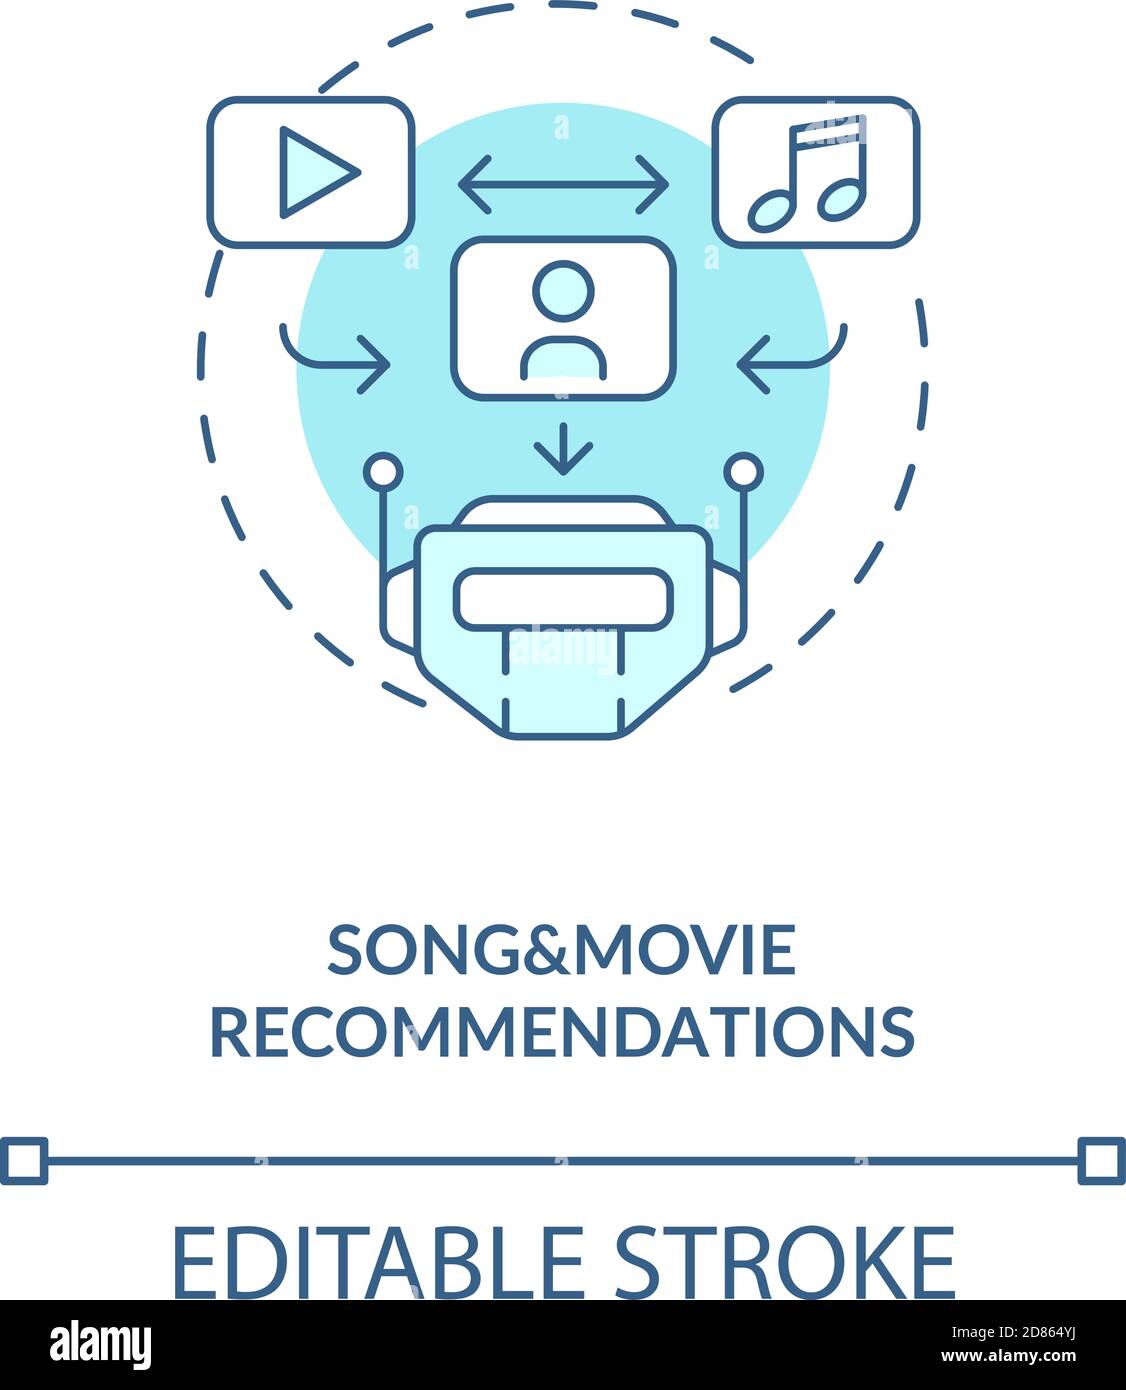 Song and movie recommendations concept icon Stock Vector